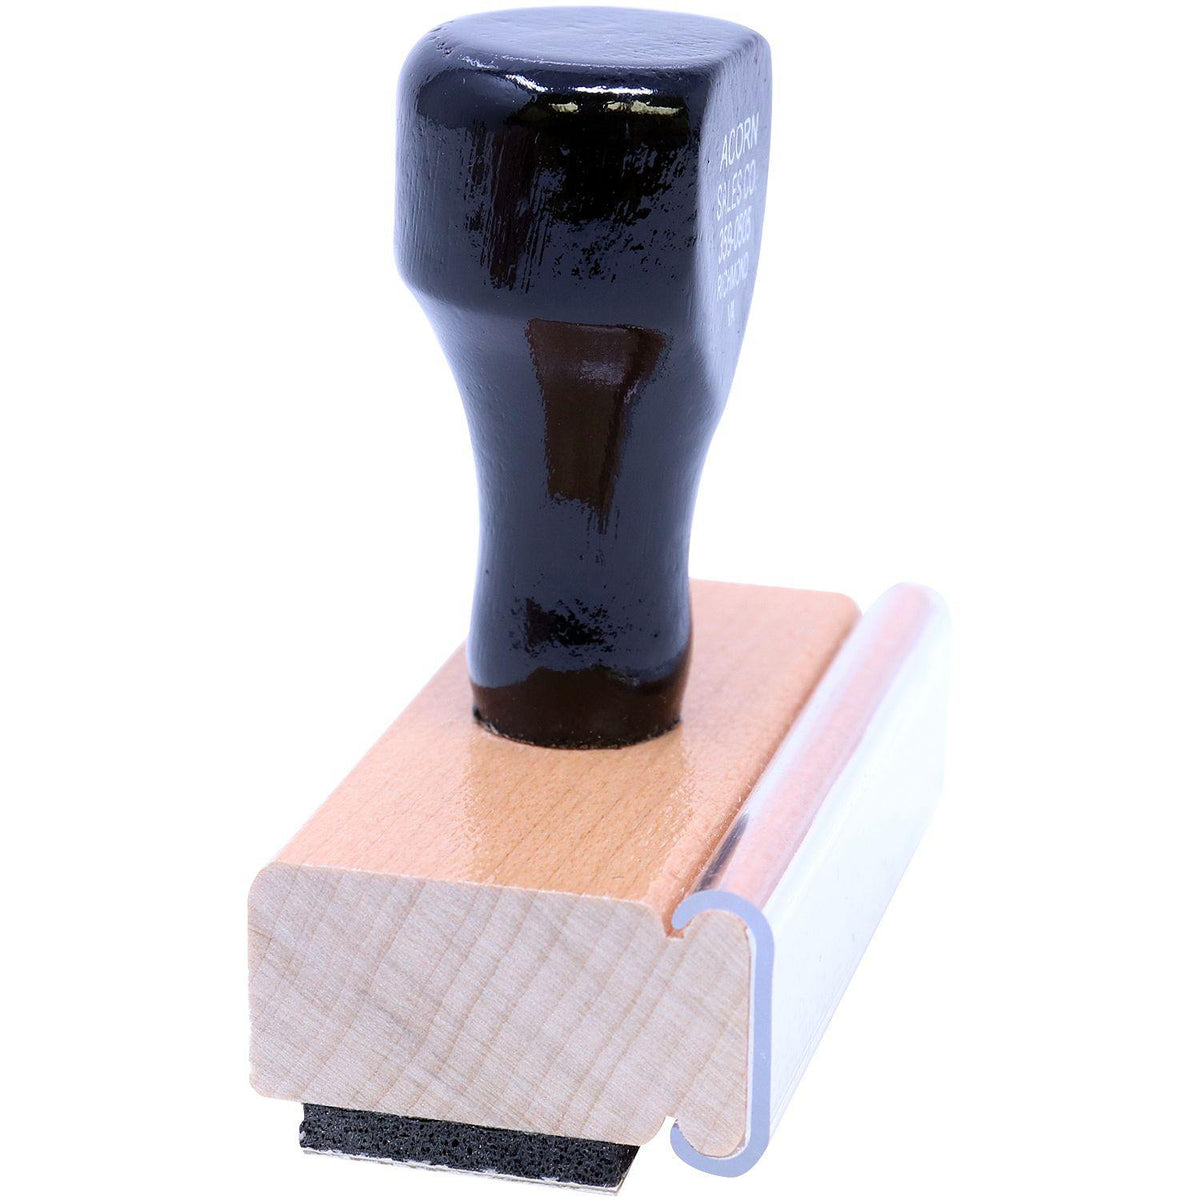 Side View of Large Good Work Rubber Stamp at an Angle